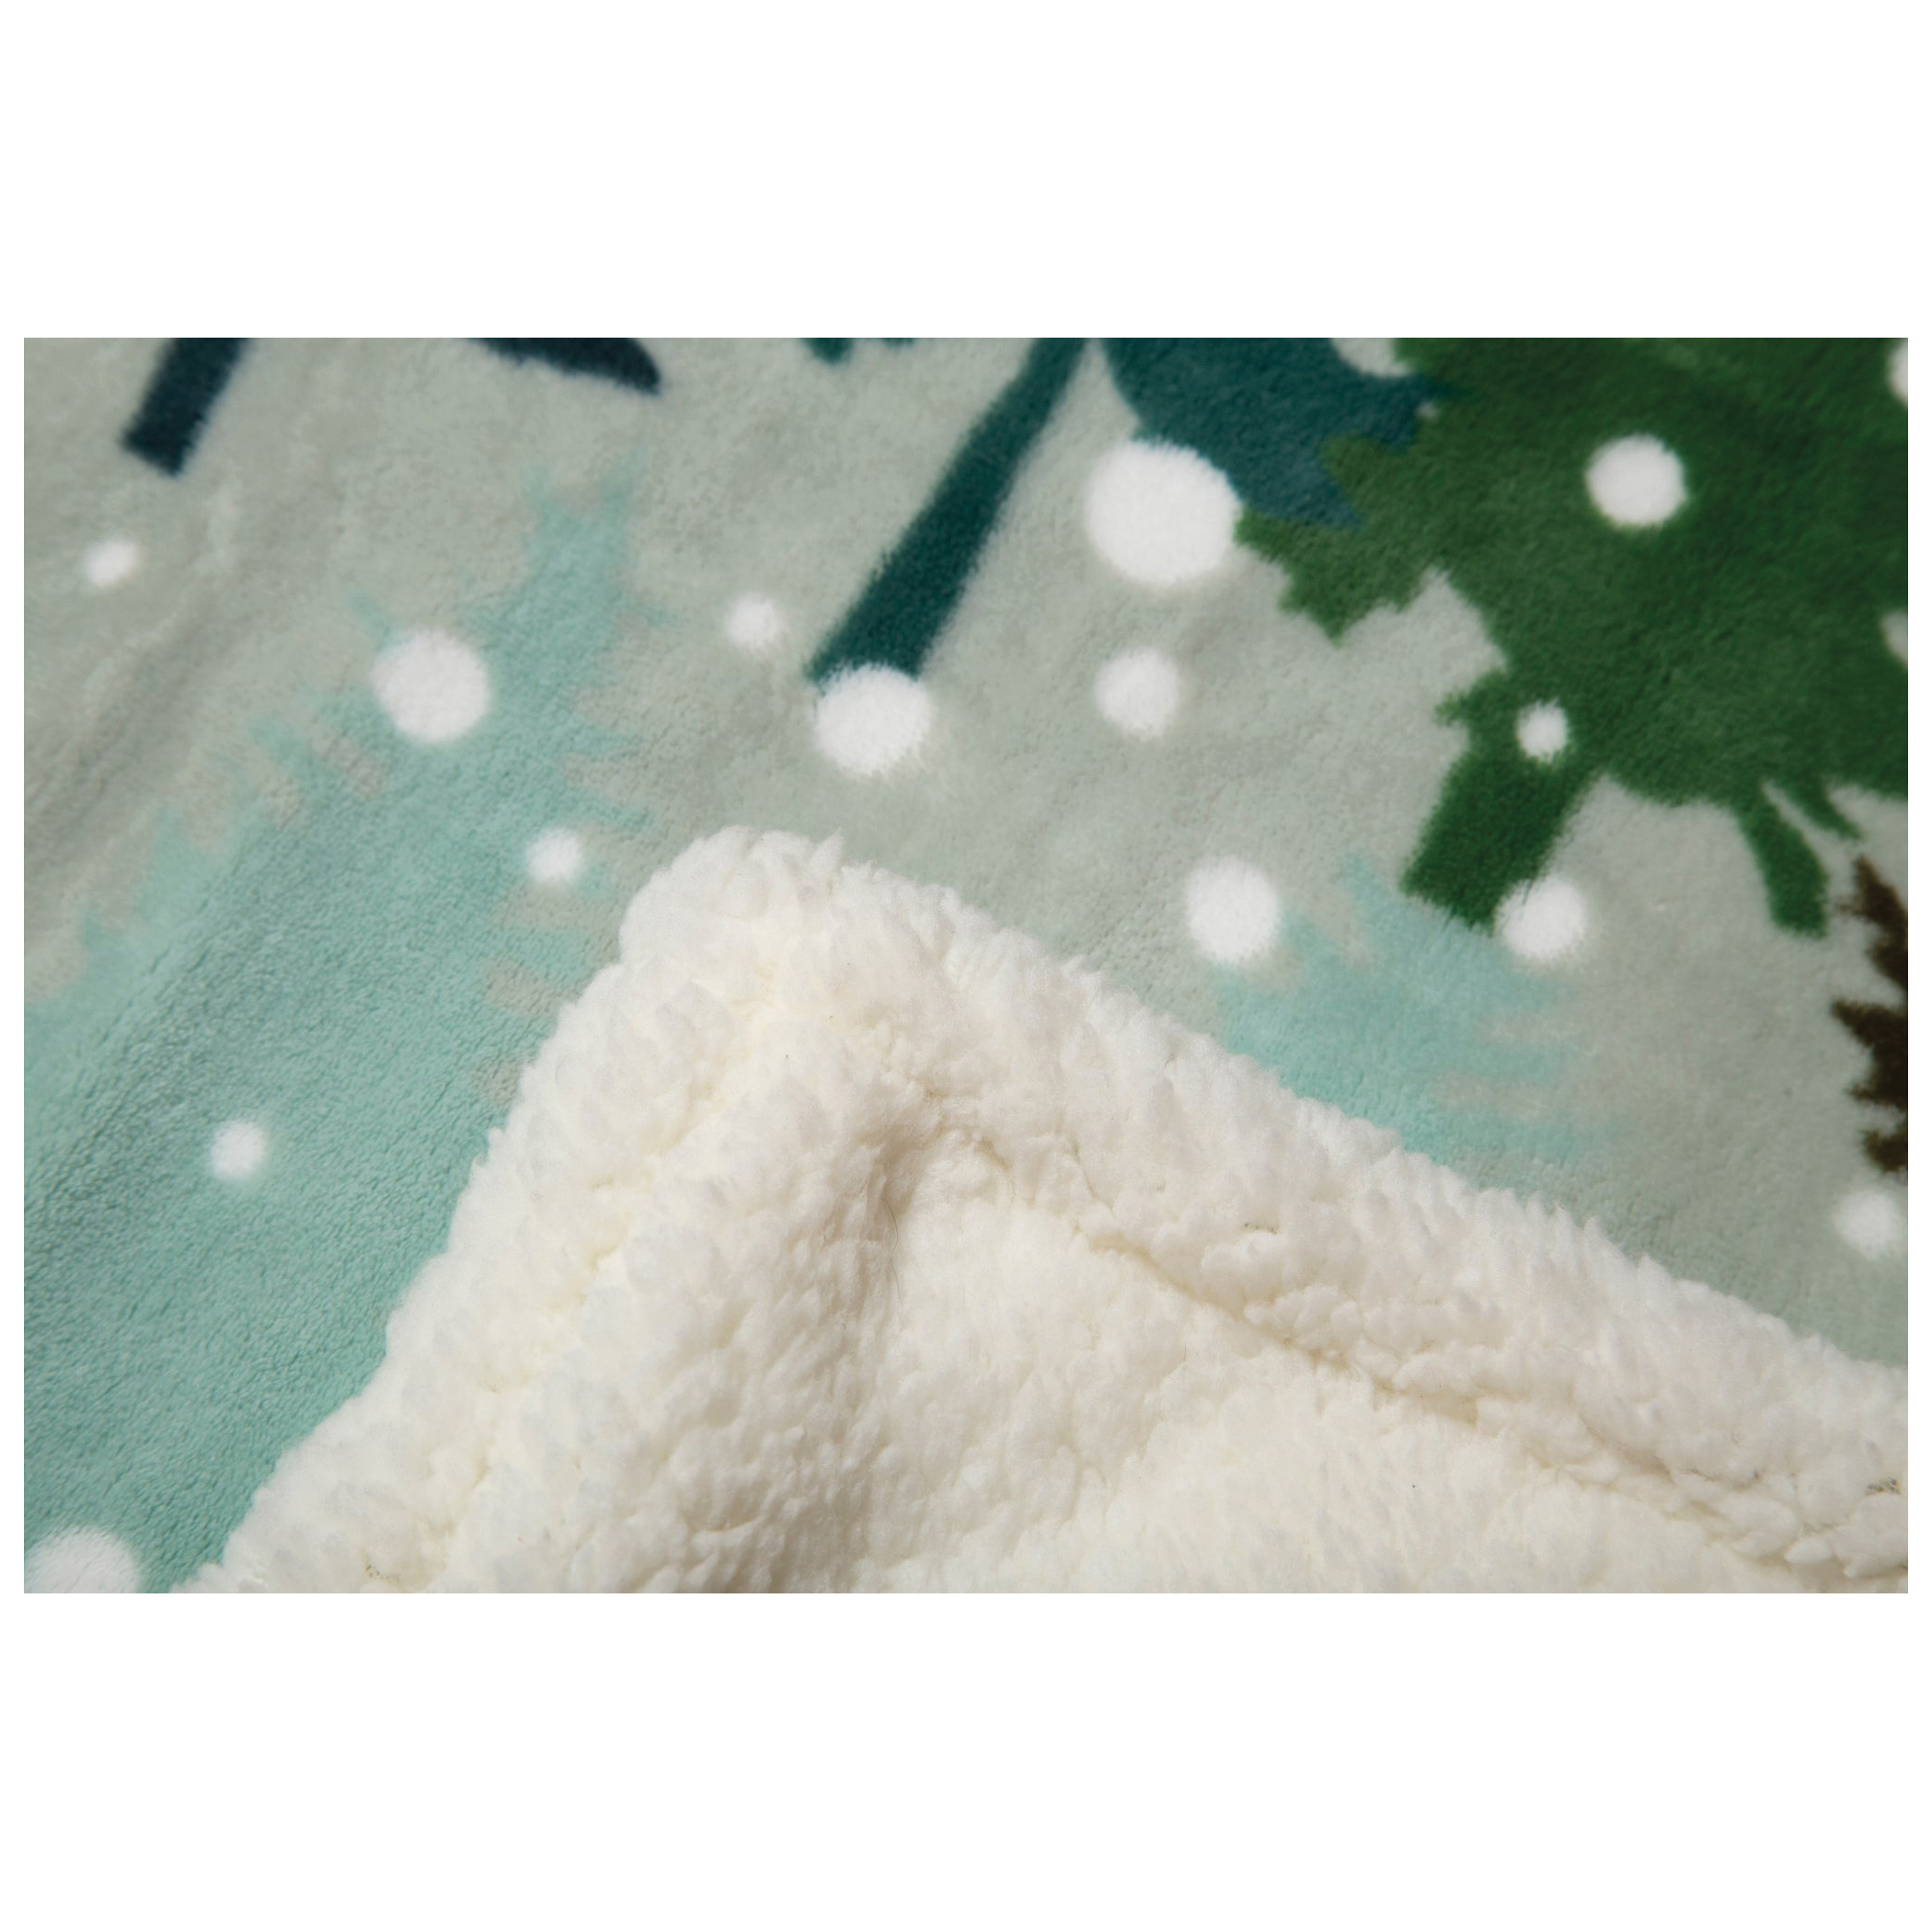 Carstens JP812 Throw Blanket, 54 in L, 68 in W, Snowflake Pattern, Polyester, Green - 4